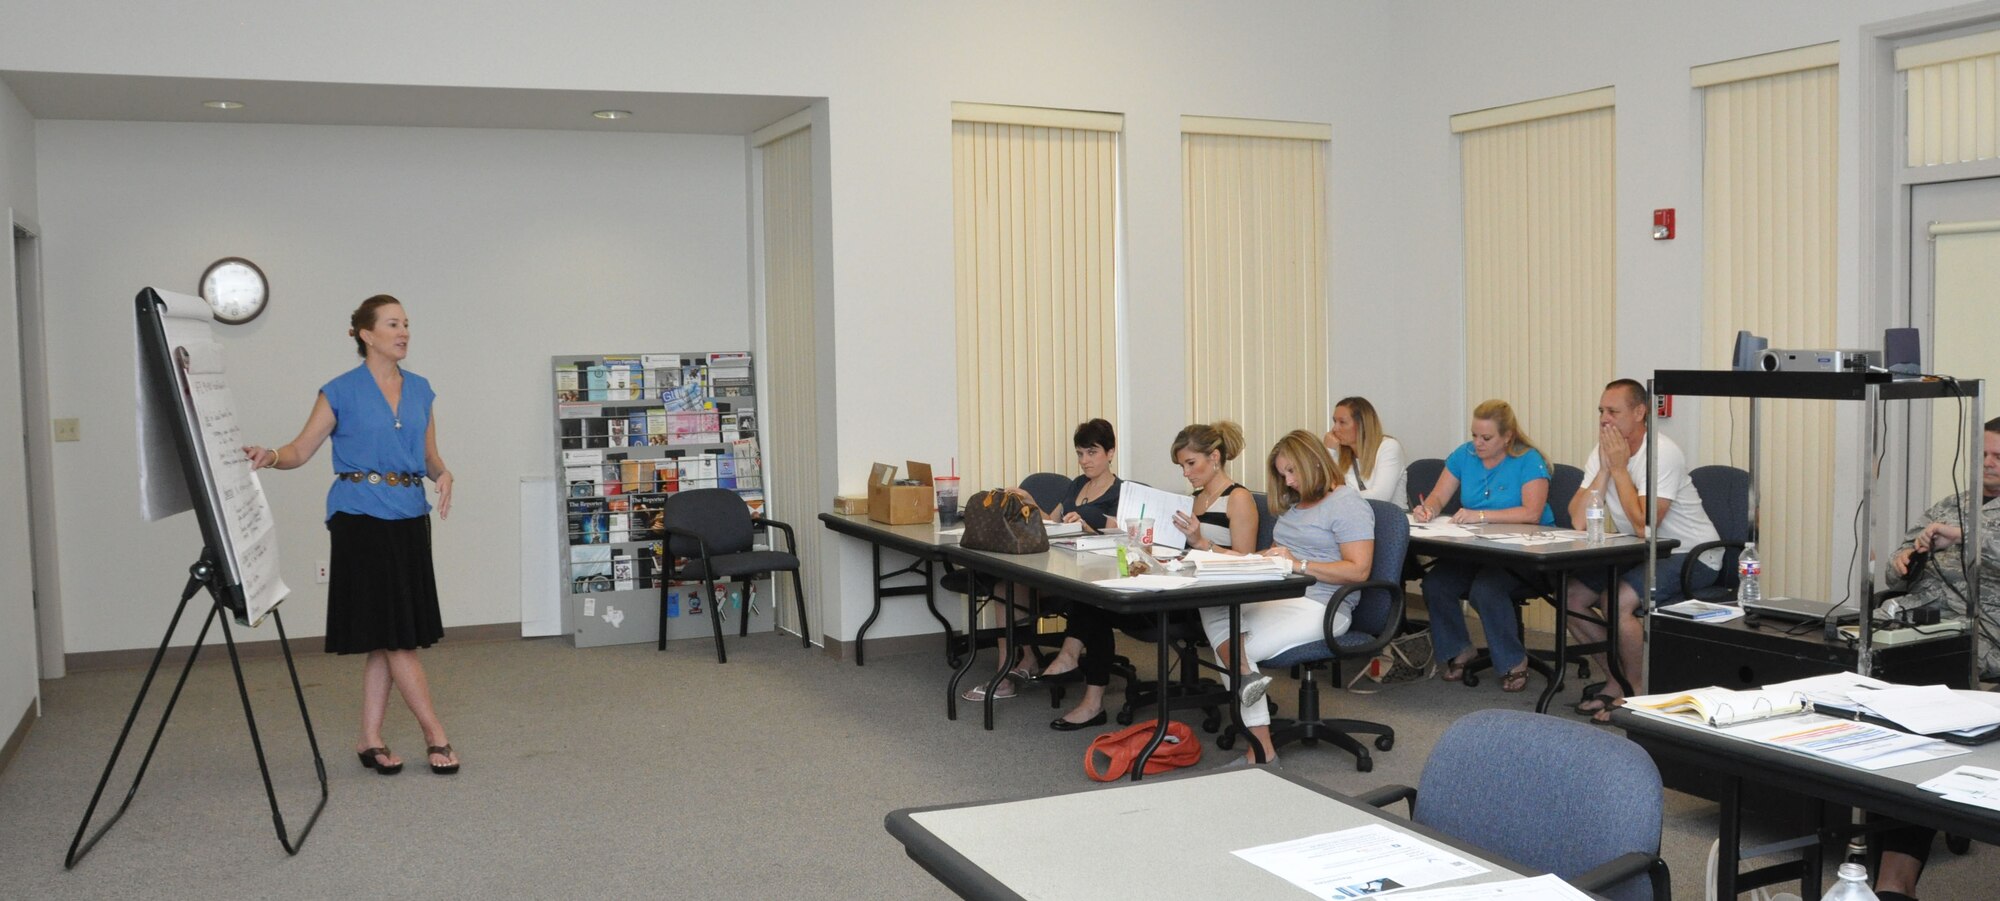 Laura Loftin, the psychological health director (DPH) for the 301st Fighter Wing, Naval Air Station Fort Worth Joint Reserve Base, Texas, provides resiliency training to 12 spouses of the wing's Key Spouse Program Sept. 7. During the training, Loftin taught key spouses how to look for depression characteristics, build resiliency, and help develop early help-seeking skills. She also provided resources, like A.C.E. – Ask, Care and Escort; to spouses should they encounter someone who needs help. (Air Force photo by Staff Sgt. Samantha Mathison)